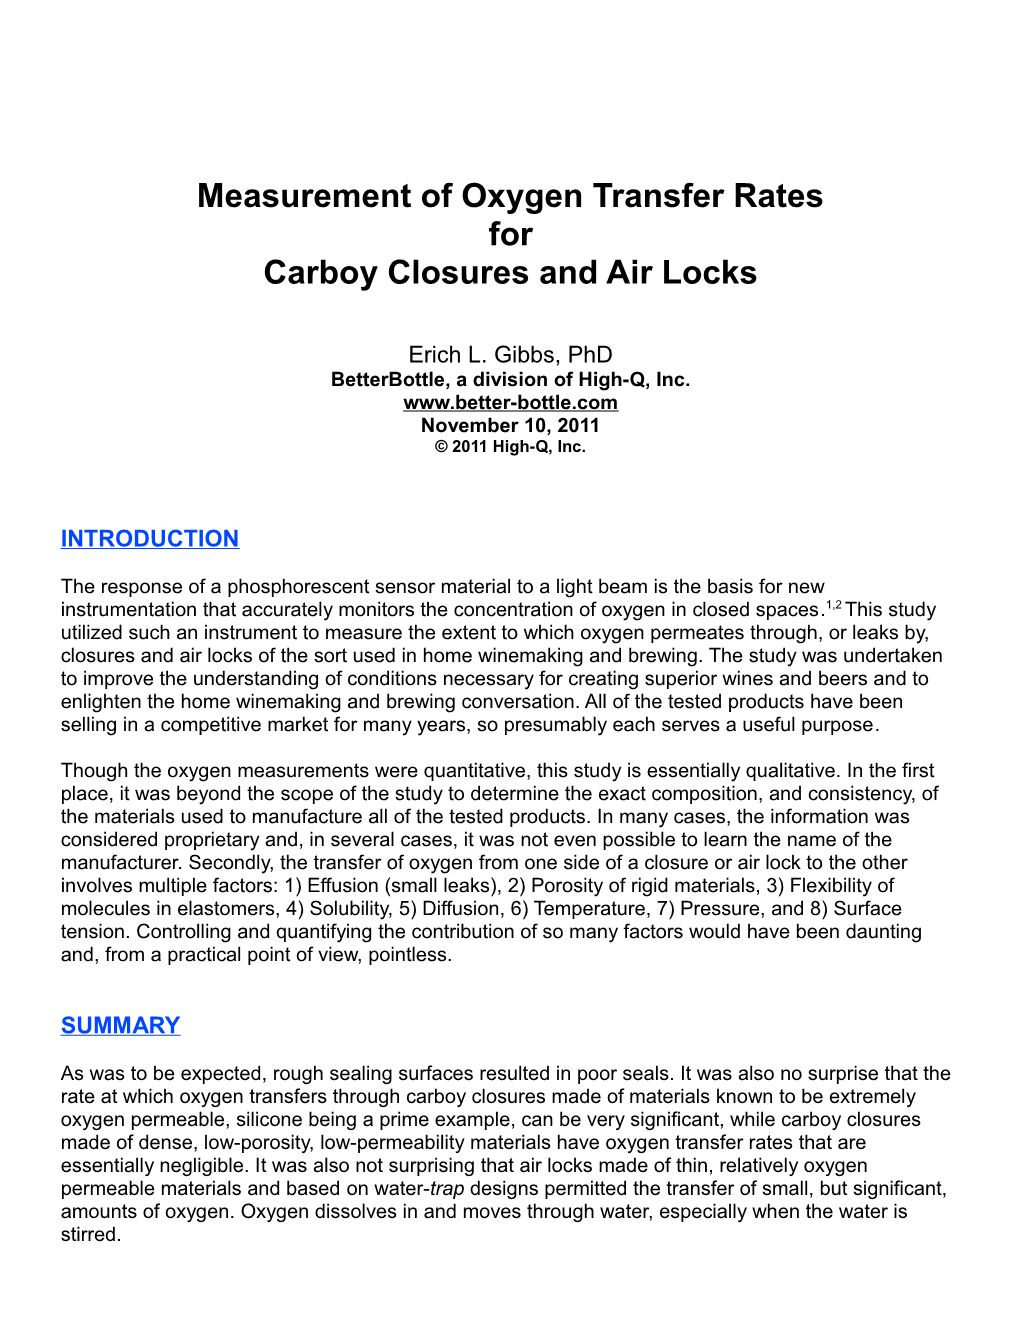 Measurement of Oxygen Transfer Rates for Carboy Closures and Air Locks